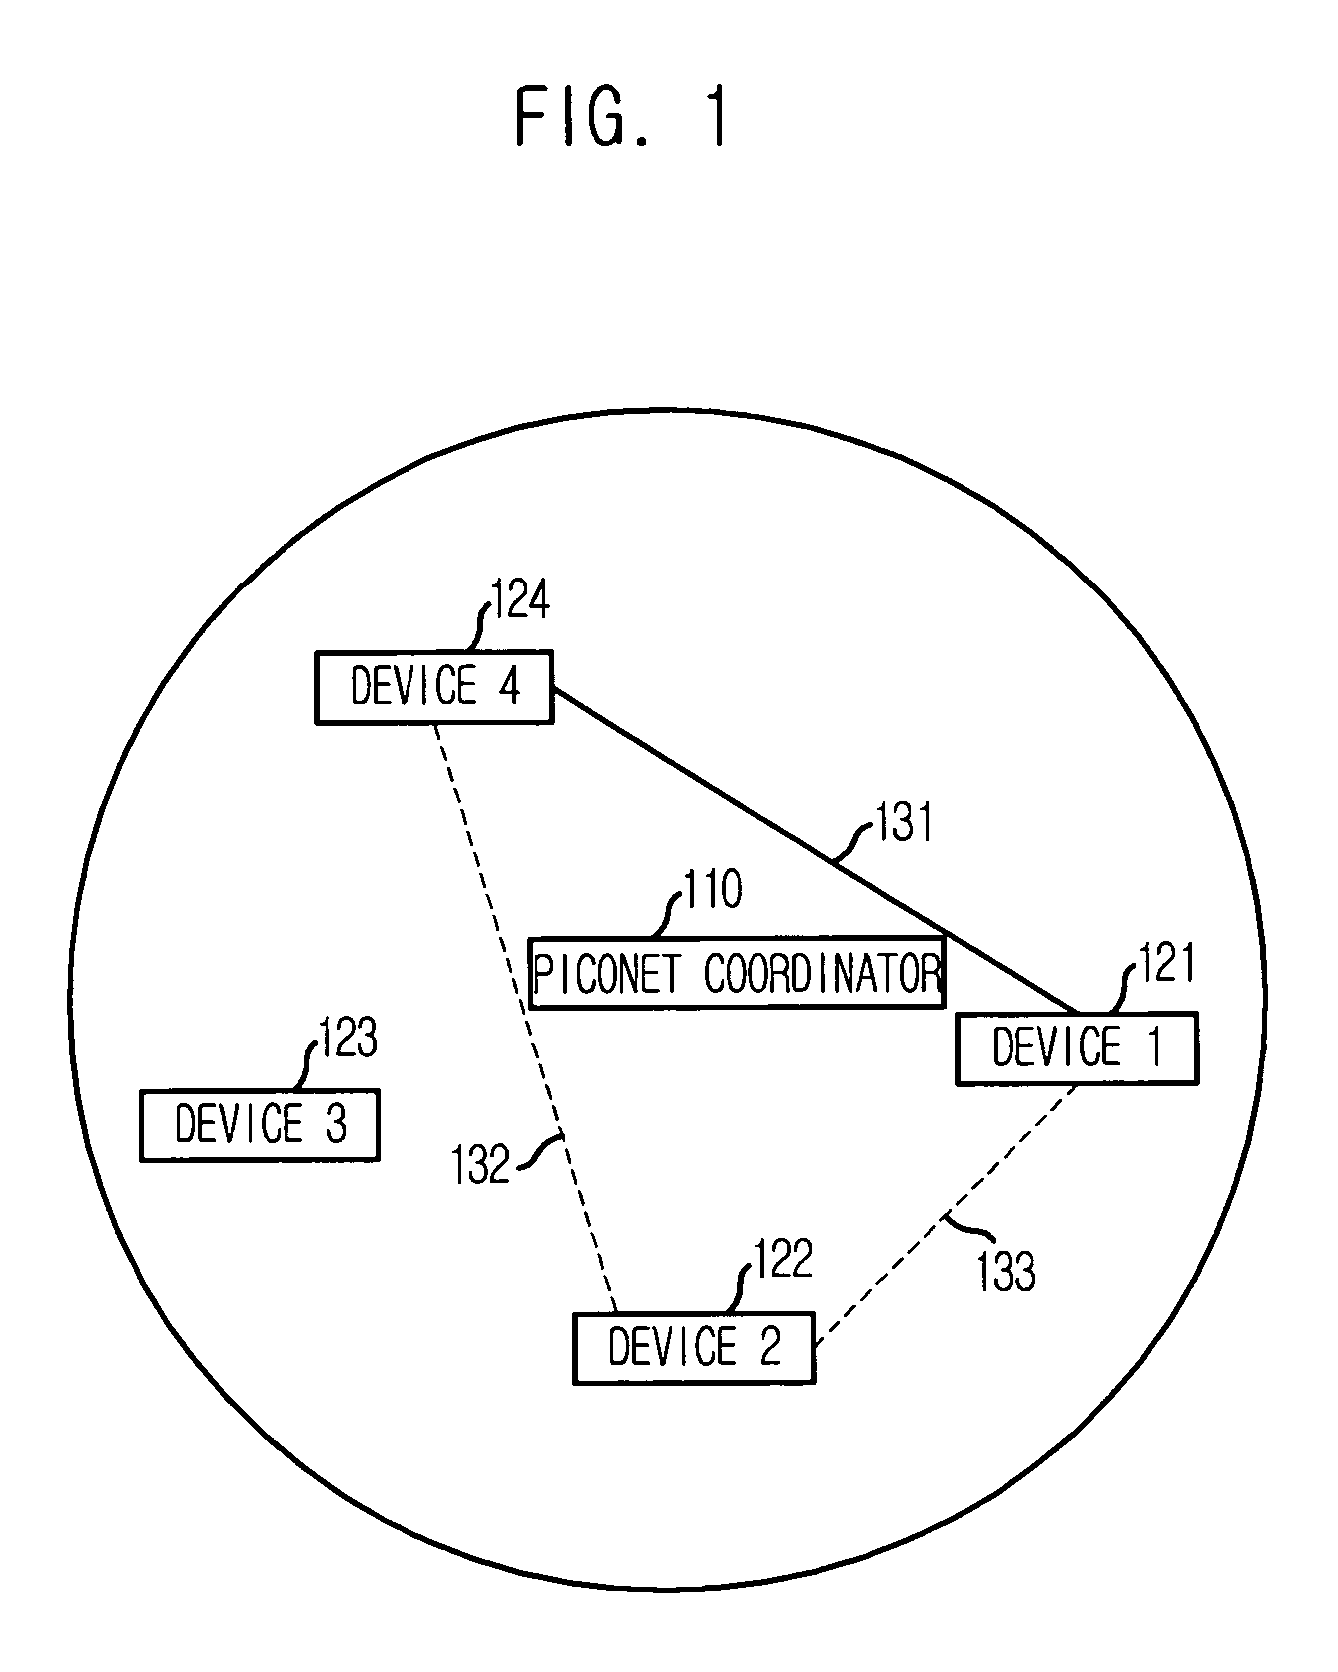 Apparatus and method for providing inter-piconet data communication in wireless personal area network